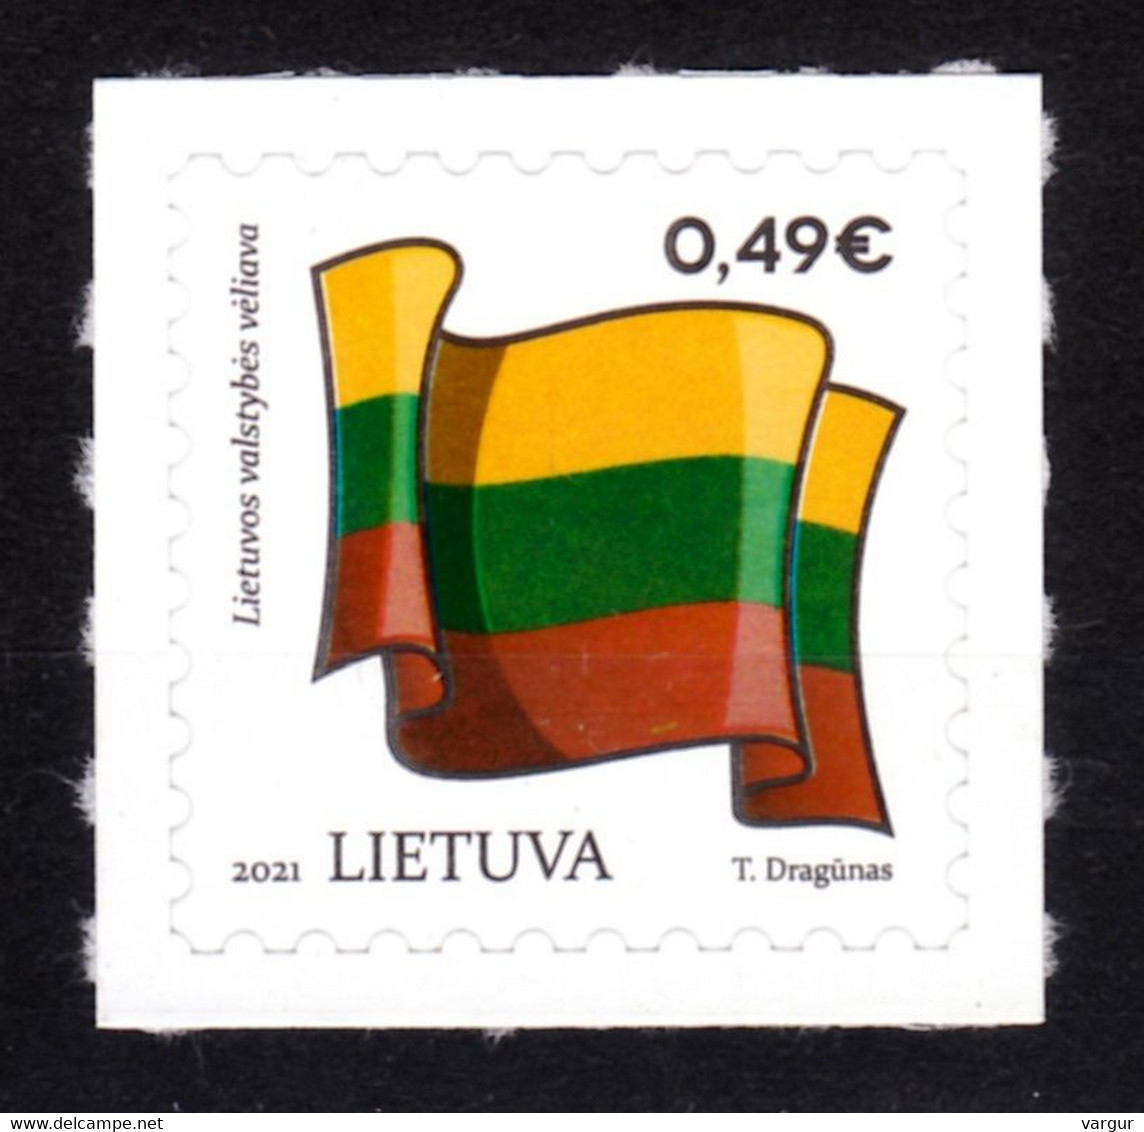 LITHUANIA 2021-12 Definitive: Flag, 49c Re-print With New Date, MINT Adhesive - Stamps